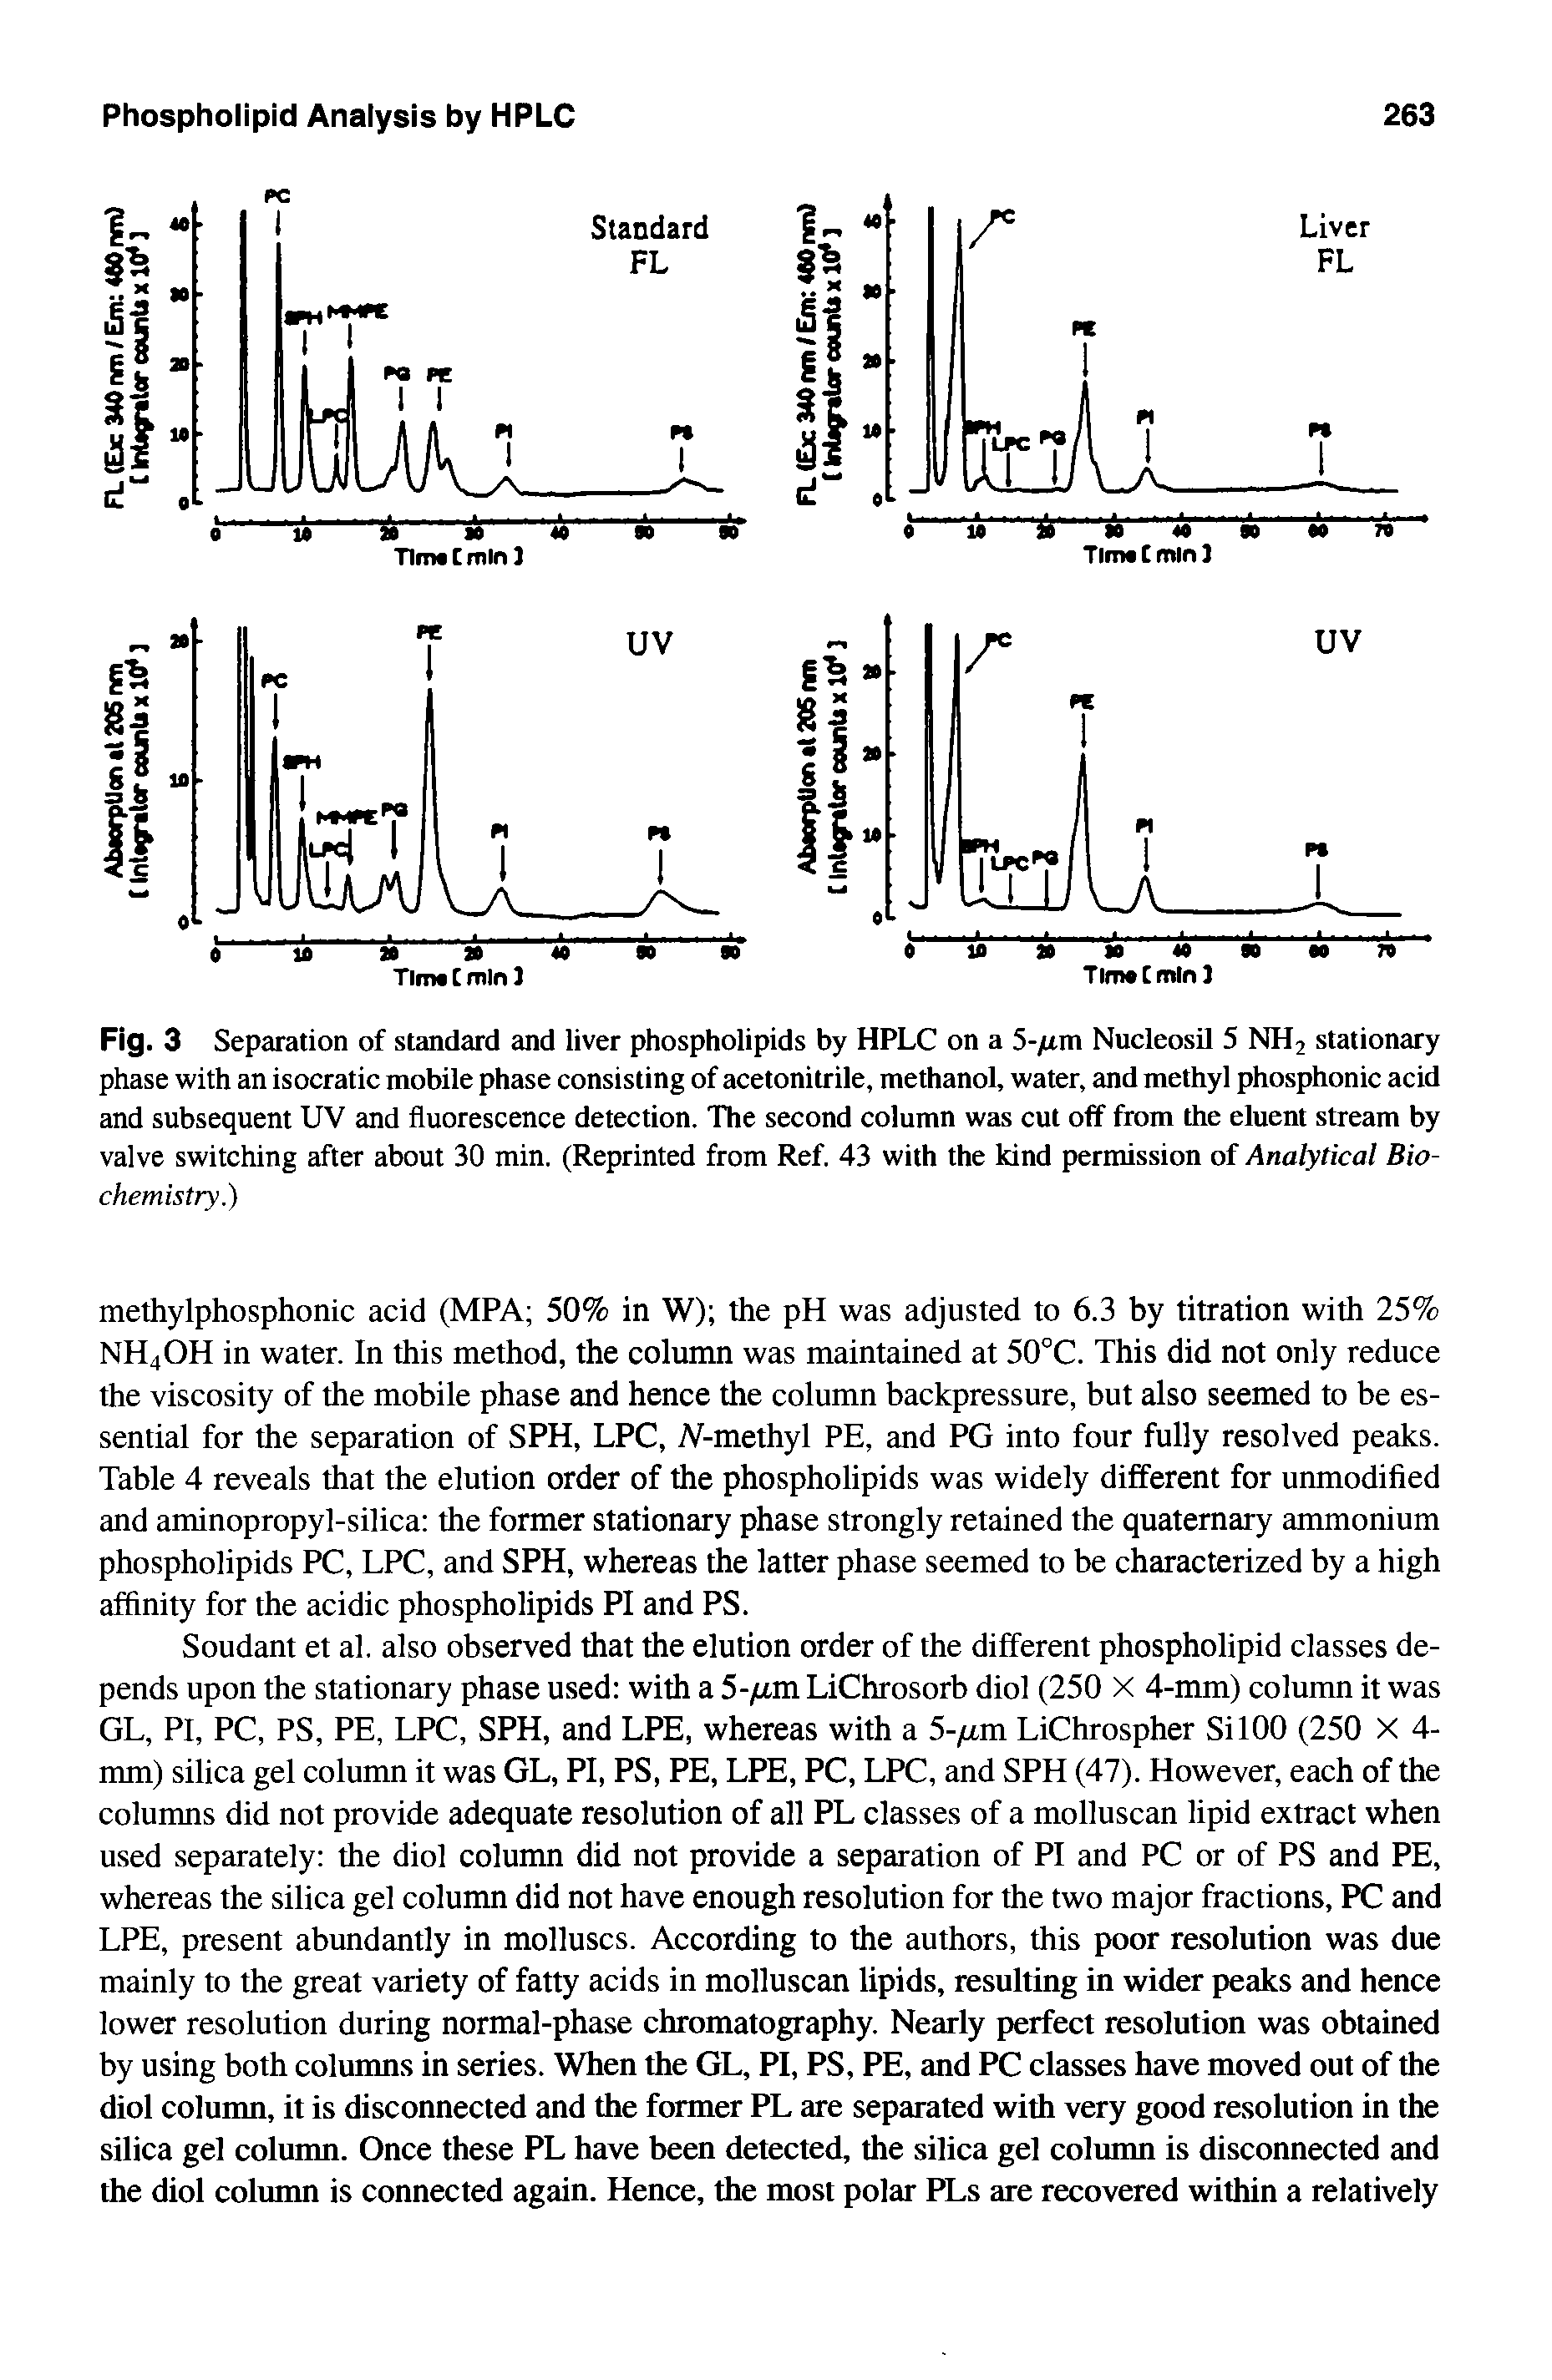 Fig. 3 Separation of standard and liver phospholipids by HPLC on a 5-yttm Nucleosil 5 NH2 stationary phase with an isocratic mobile phase consisting of acetonitrile, methanol, water, and methyl phosphonic acid and subsequent UV and fluorescence detection. The second column was cut off from the eluent stream by valve switching after about 30 min. (Reprinted from Ref. 43 with the kind permission of Analytical Biochemistry.)...